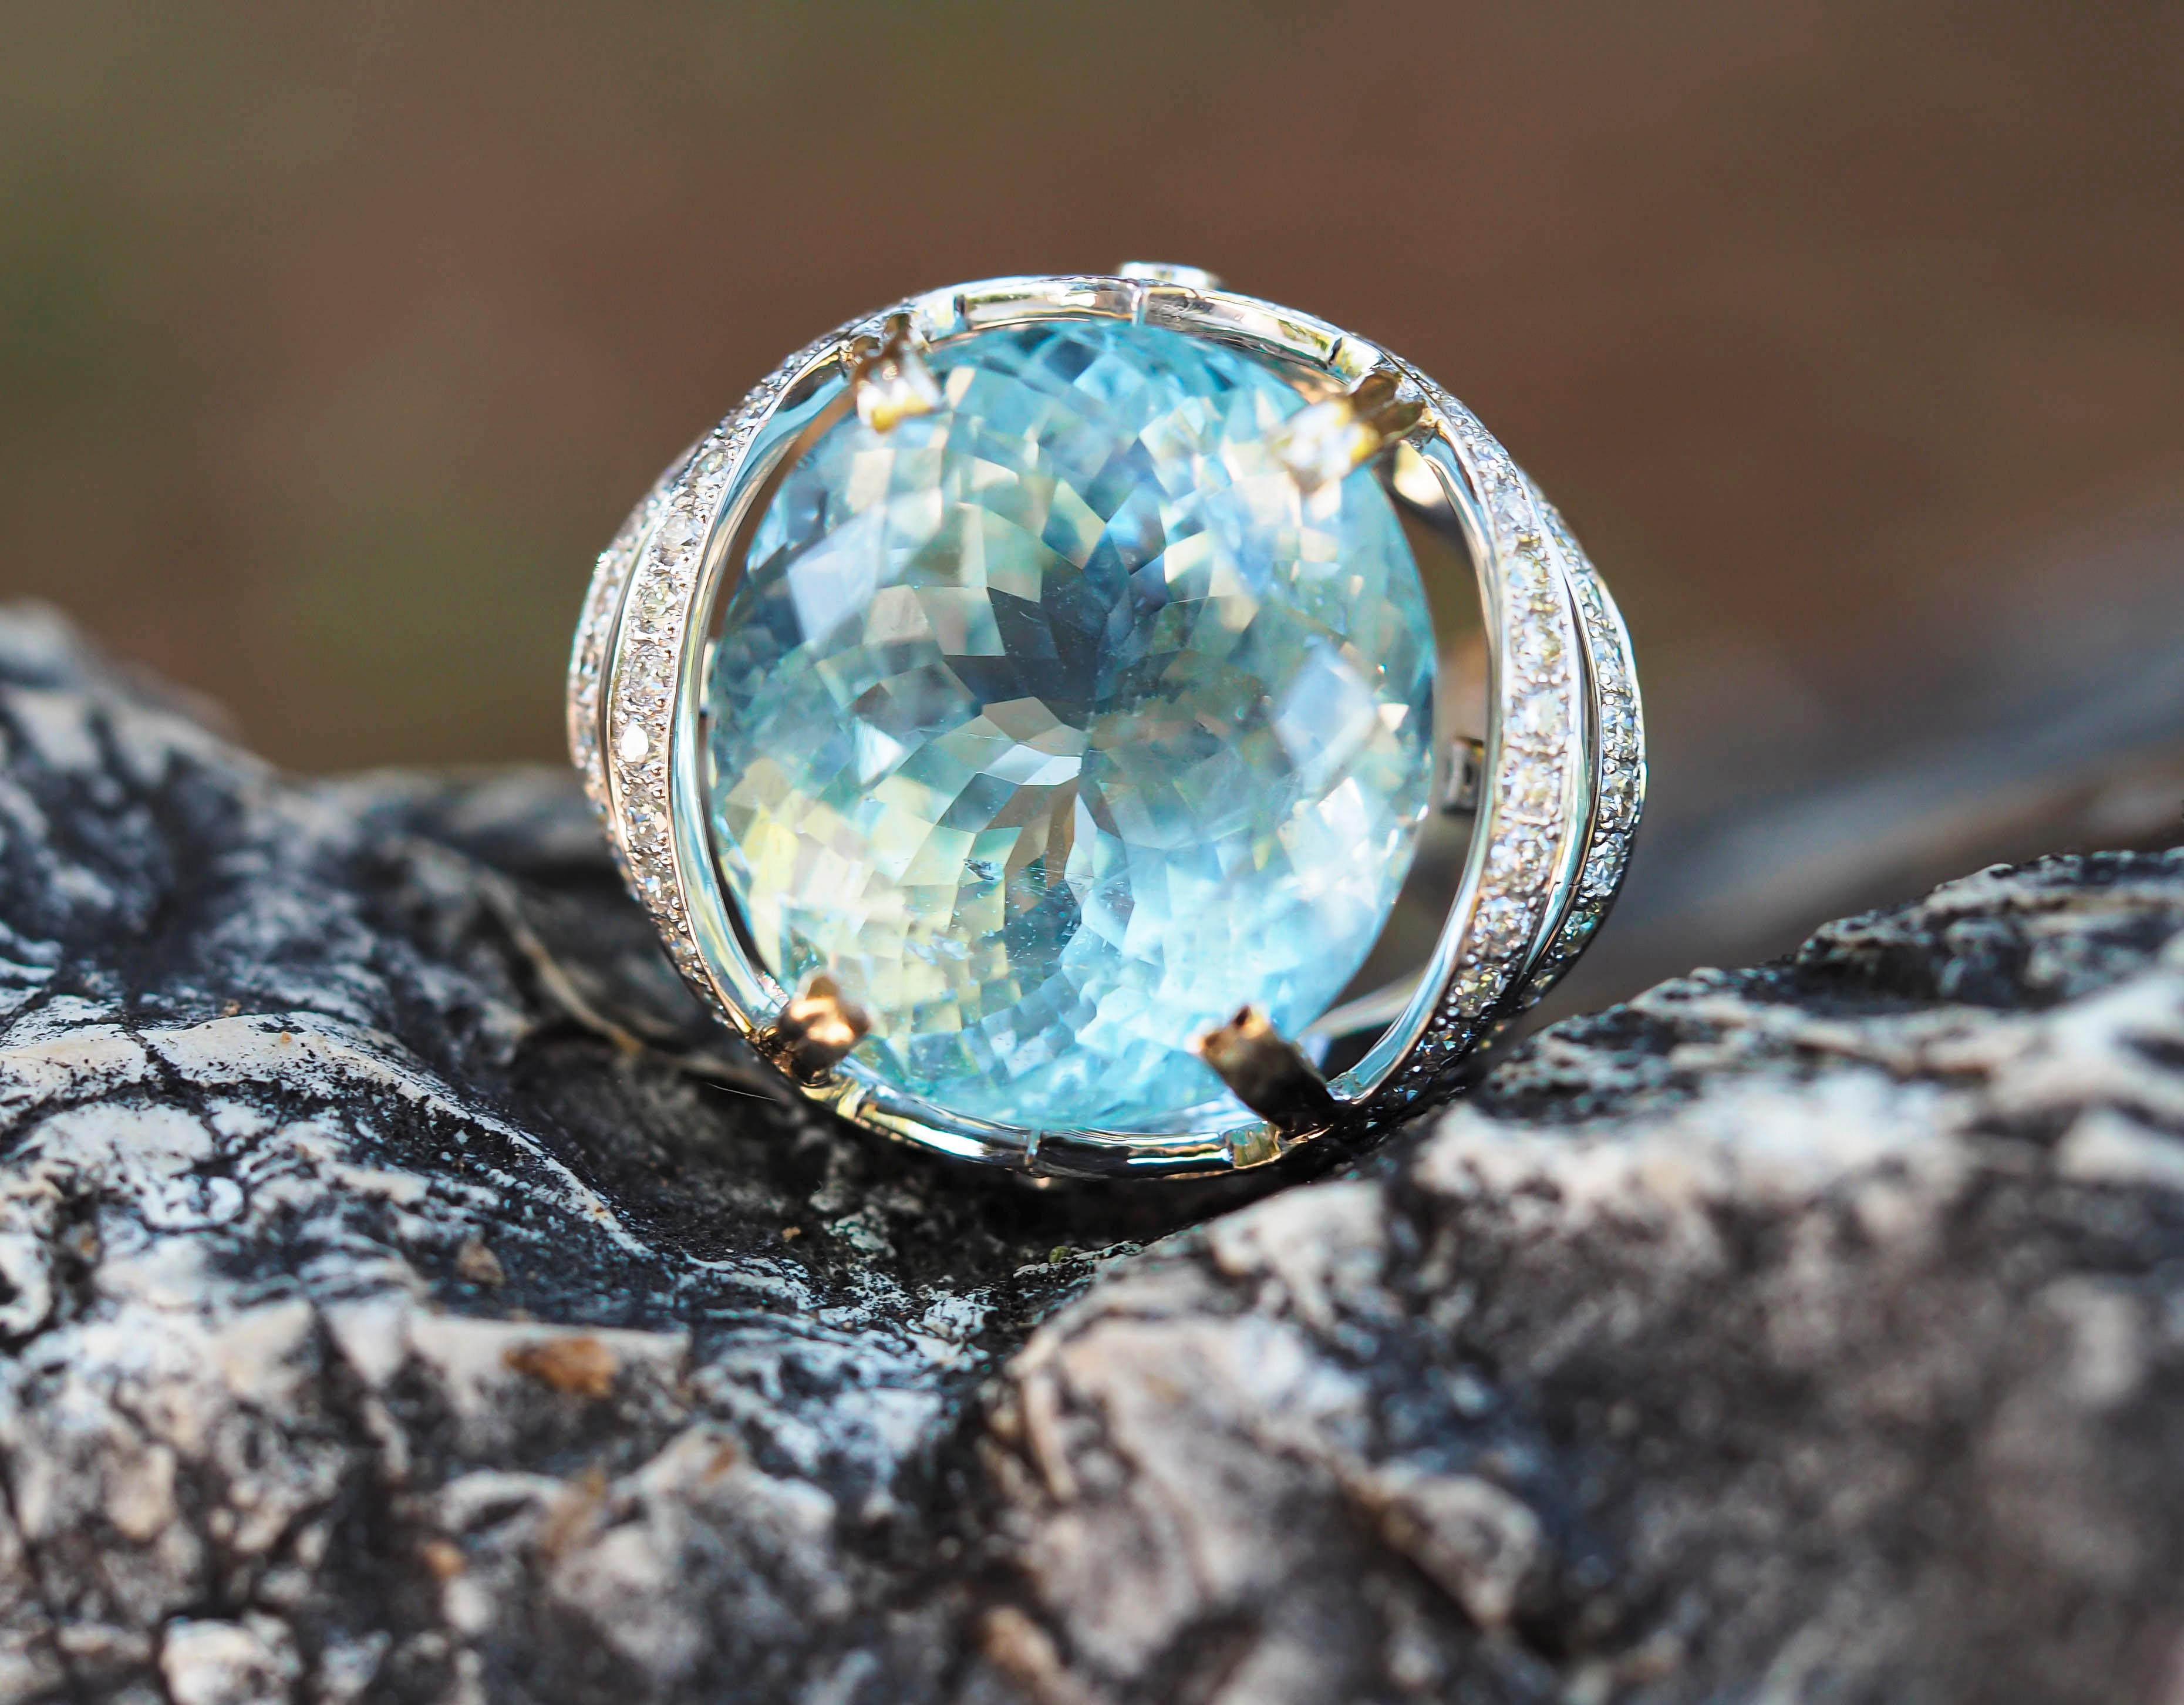 Certified ring with 25.50 ct aquamarine and diamonds
Weight: 17.12 g.
Gold - 18 kt gold

Central stone: Aquamarine
Cut: Oval
Weight: 25.50 ct.
Color: very pale blue
Clarity: Si

MSU (Moscow state gemmological lab) certificate D-279430 online